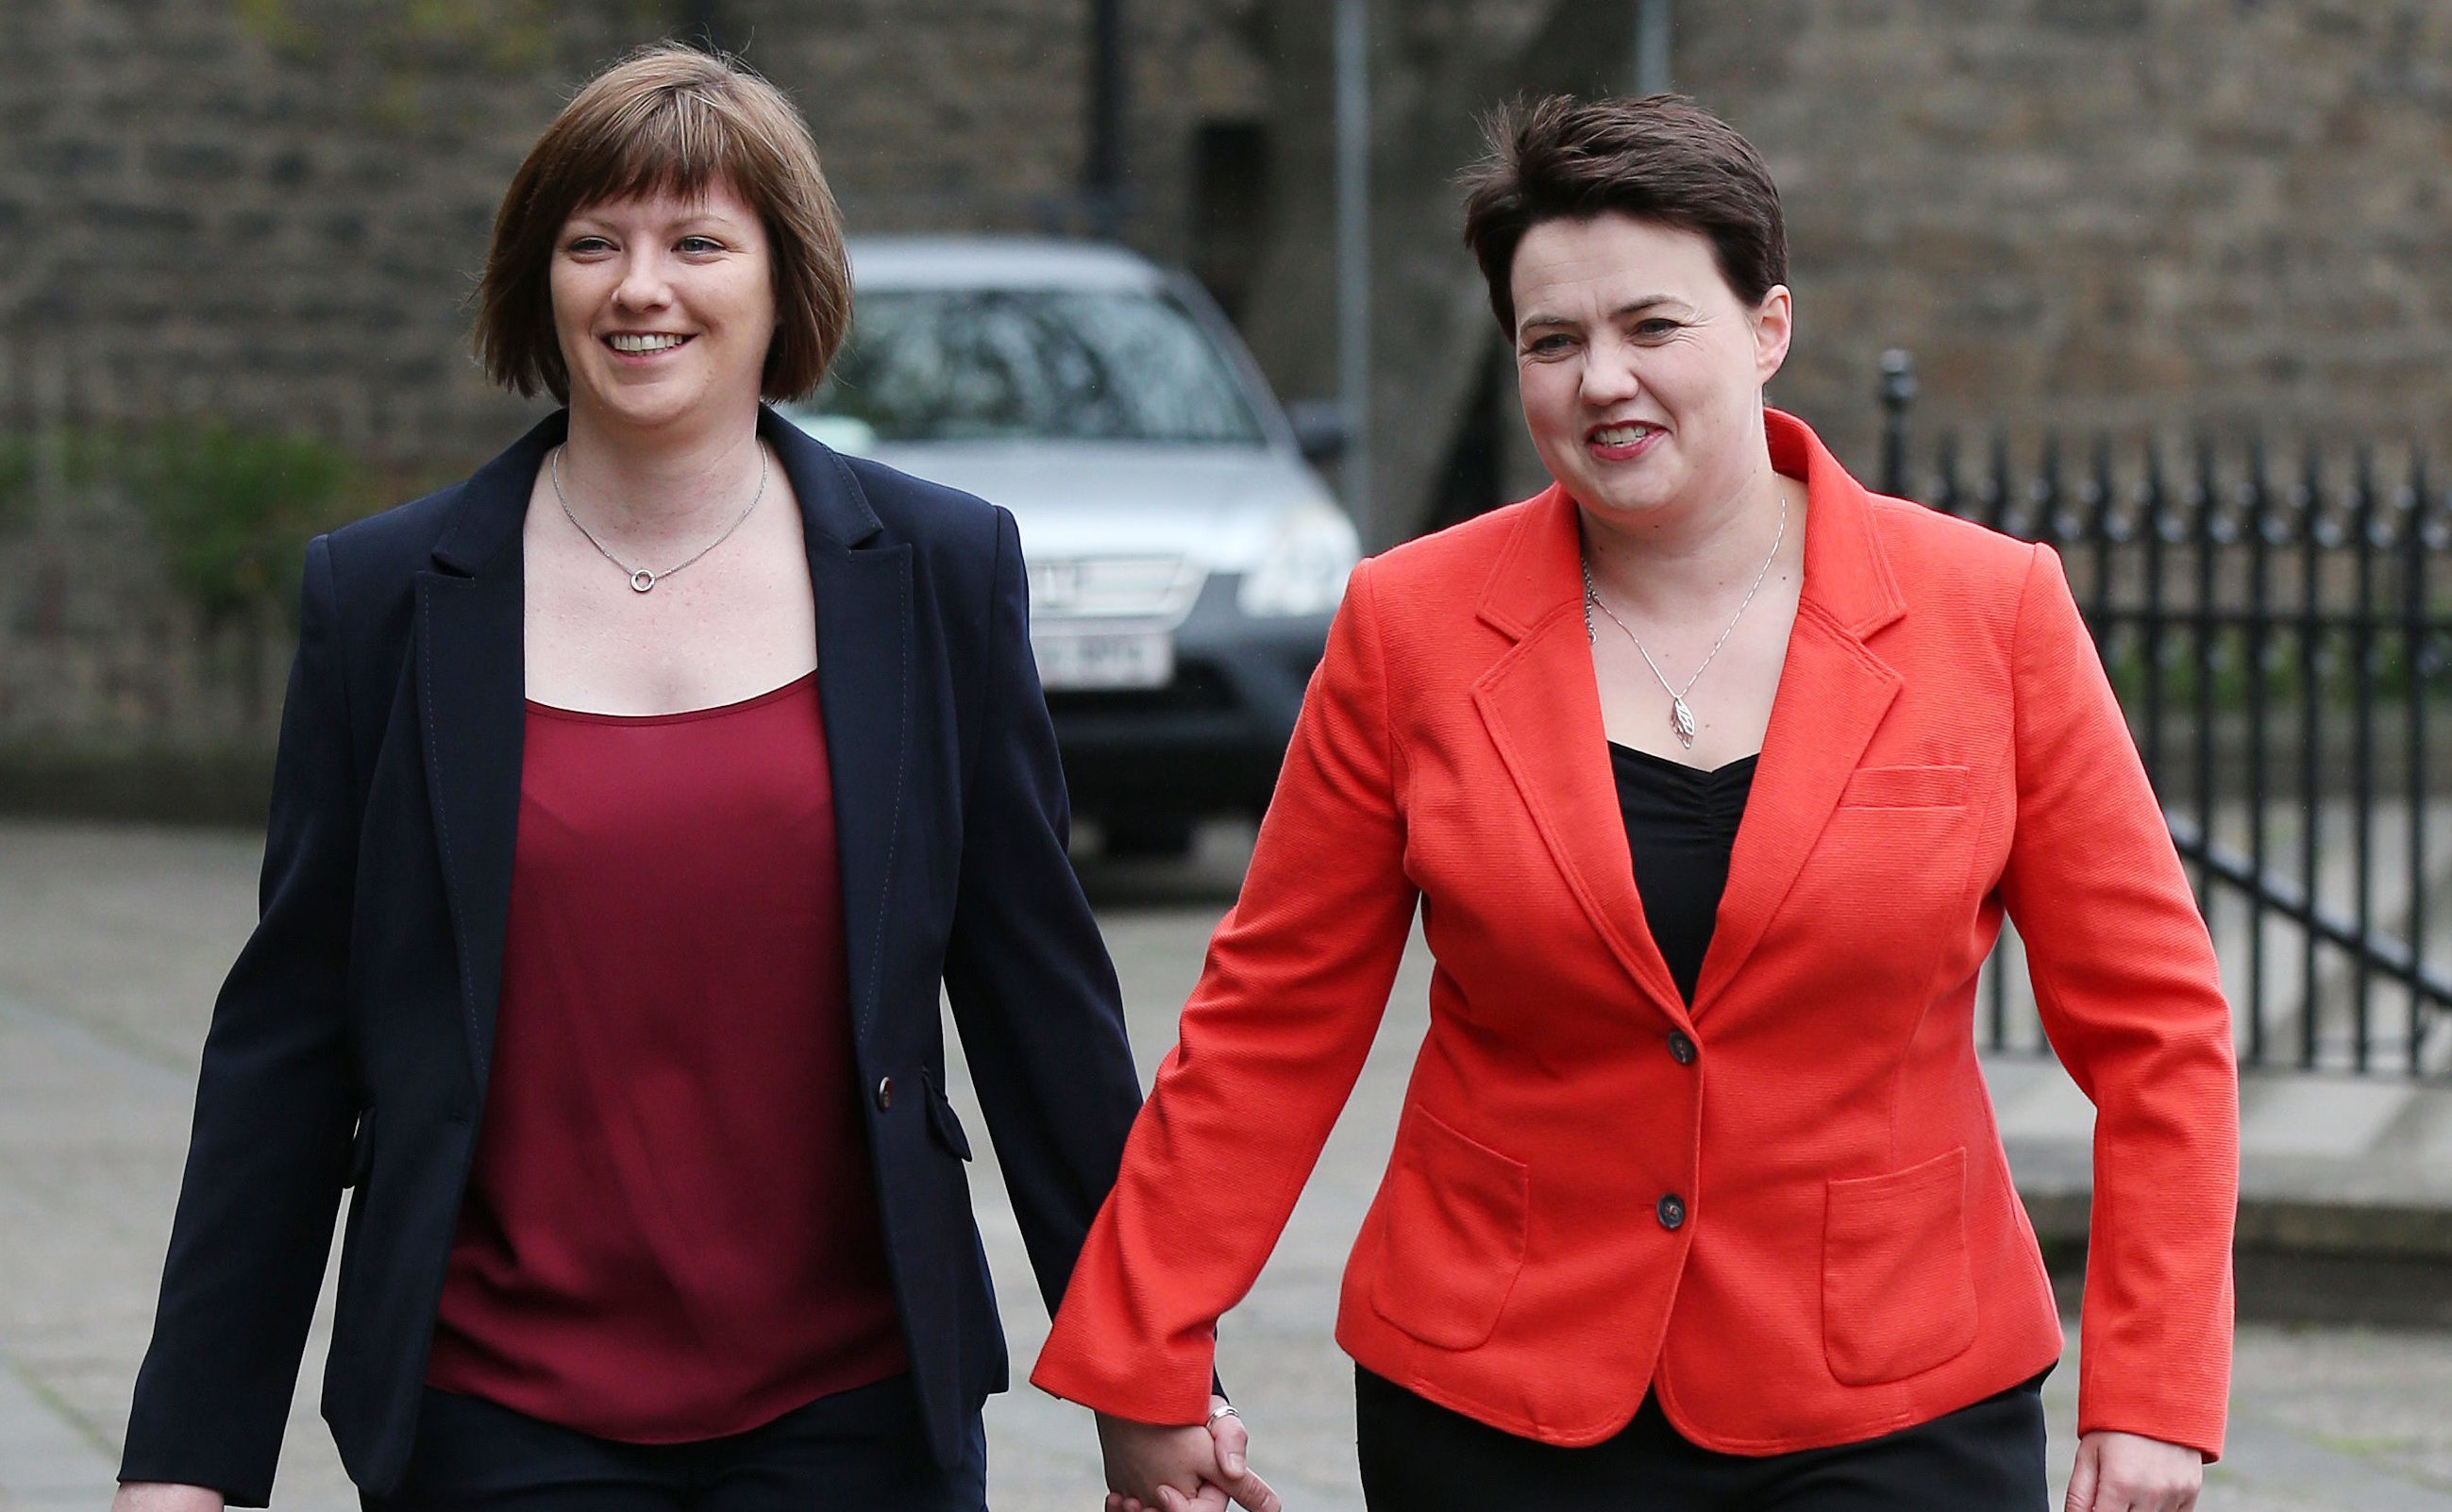 Scottish Conservative leader Ruth Davidson  and her partner Jen Wilson have got announced they are engaged.